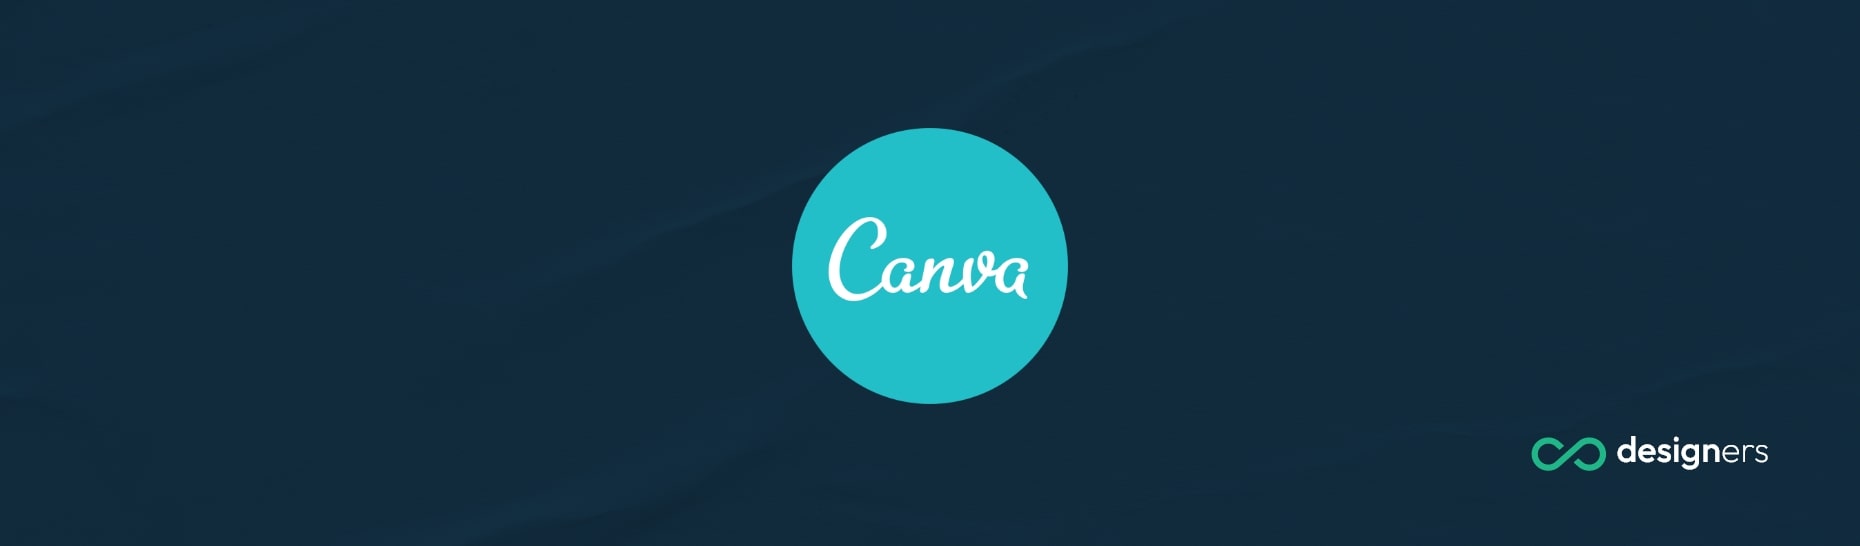 Is Canva Good for YouTube Video Editing?